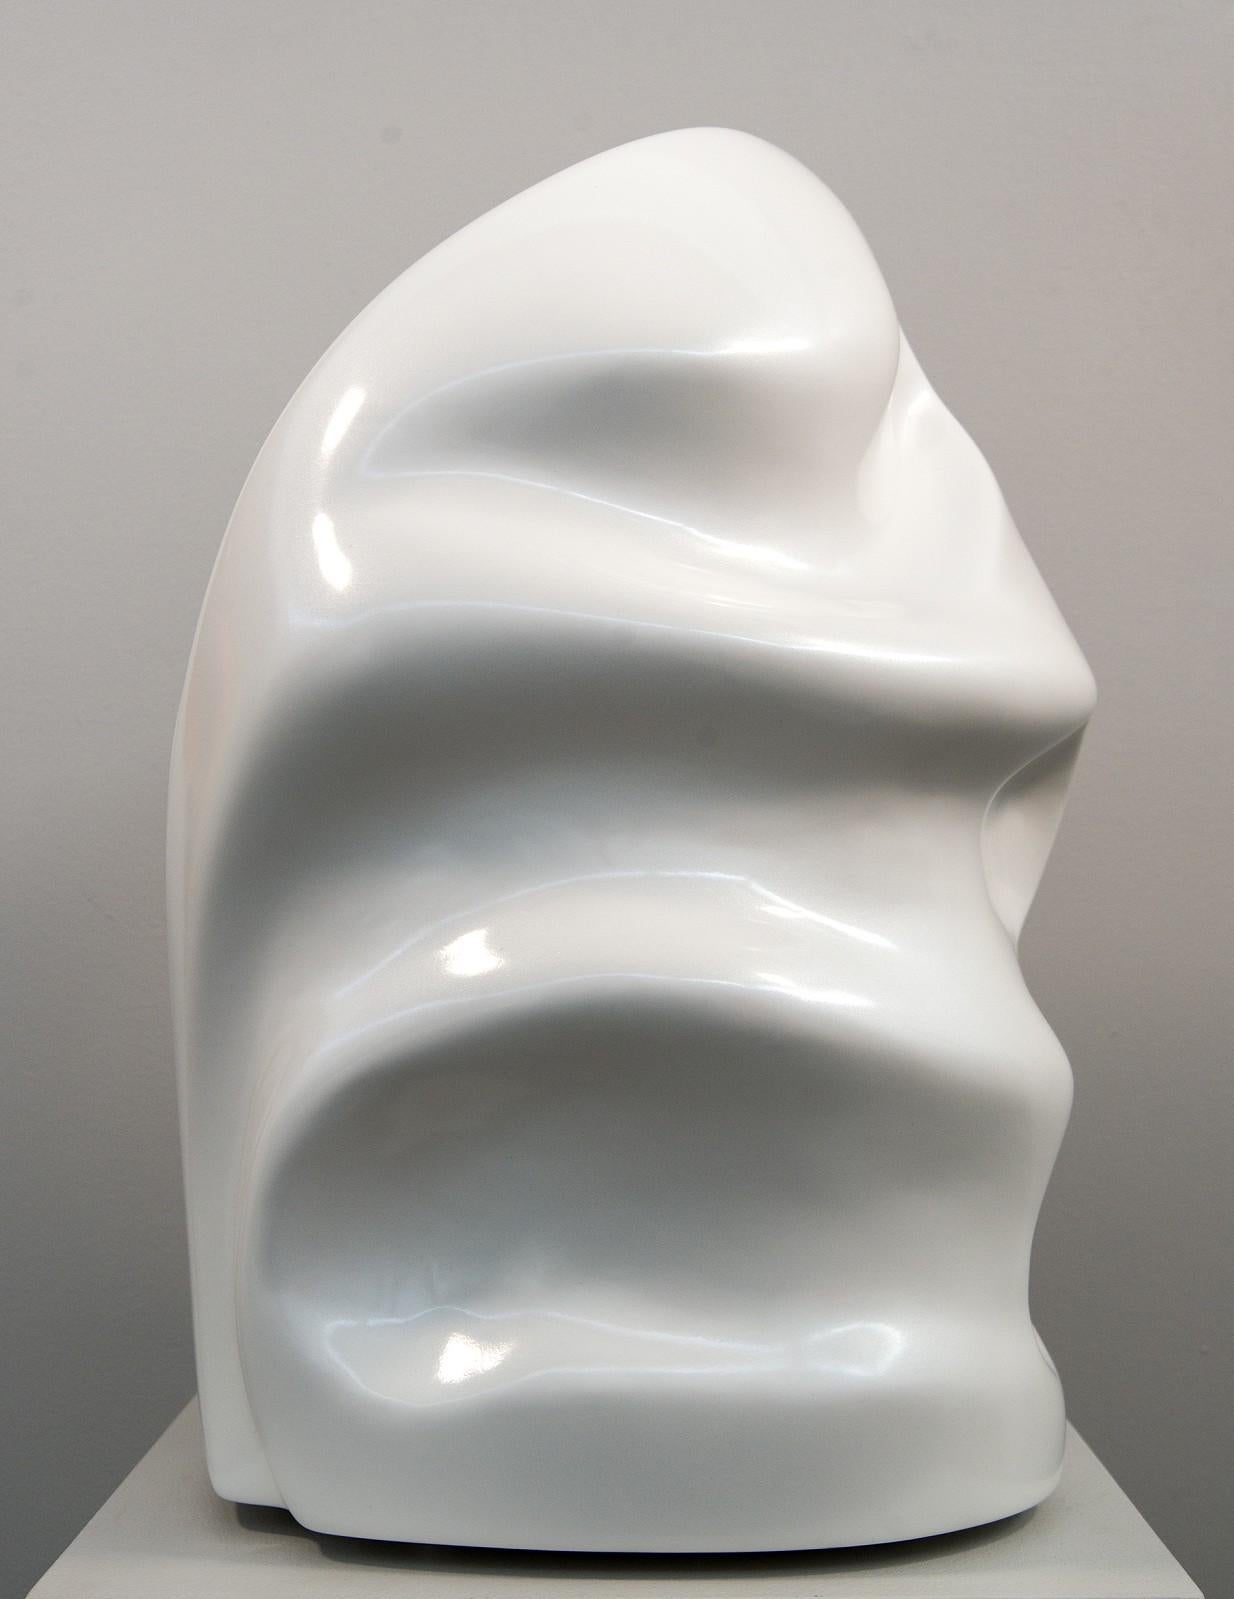 Sage AP - white, swirling, gestural abstract, resin sculpture - Sculpture by Tim Forbes